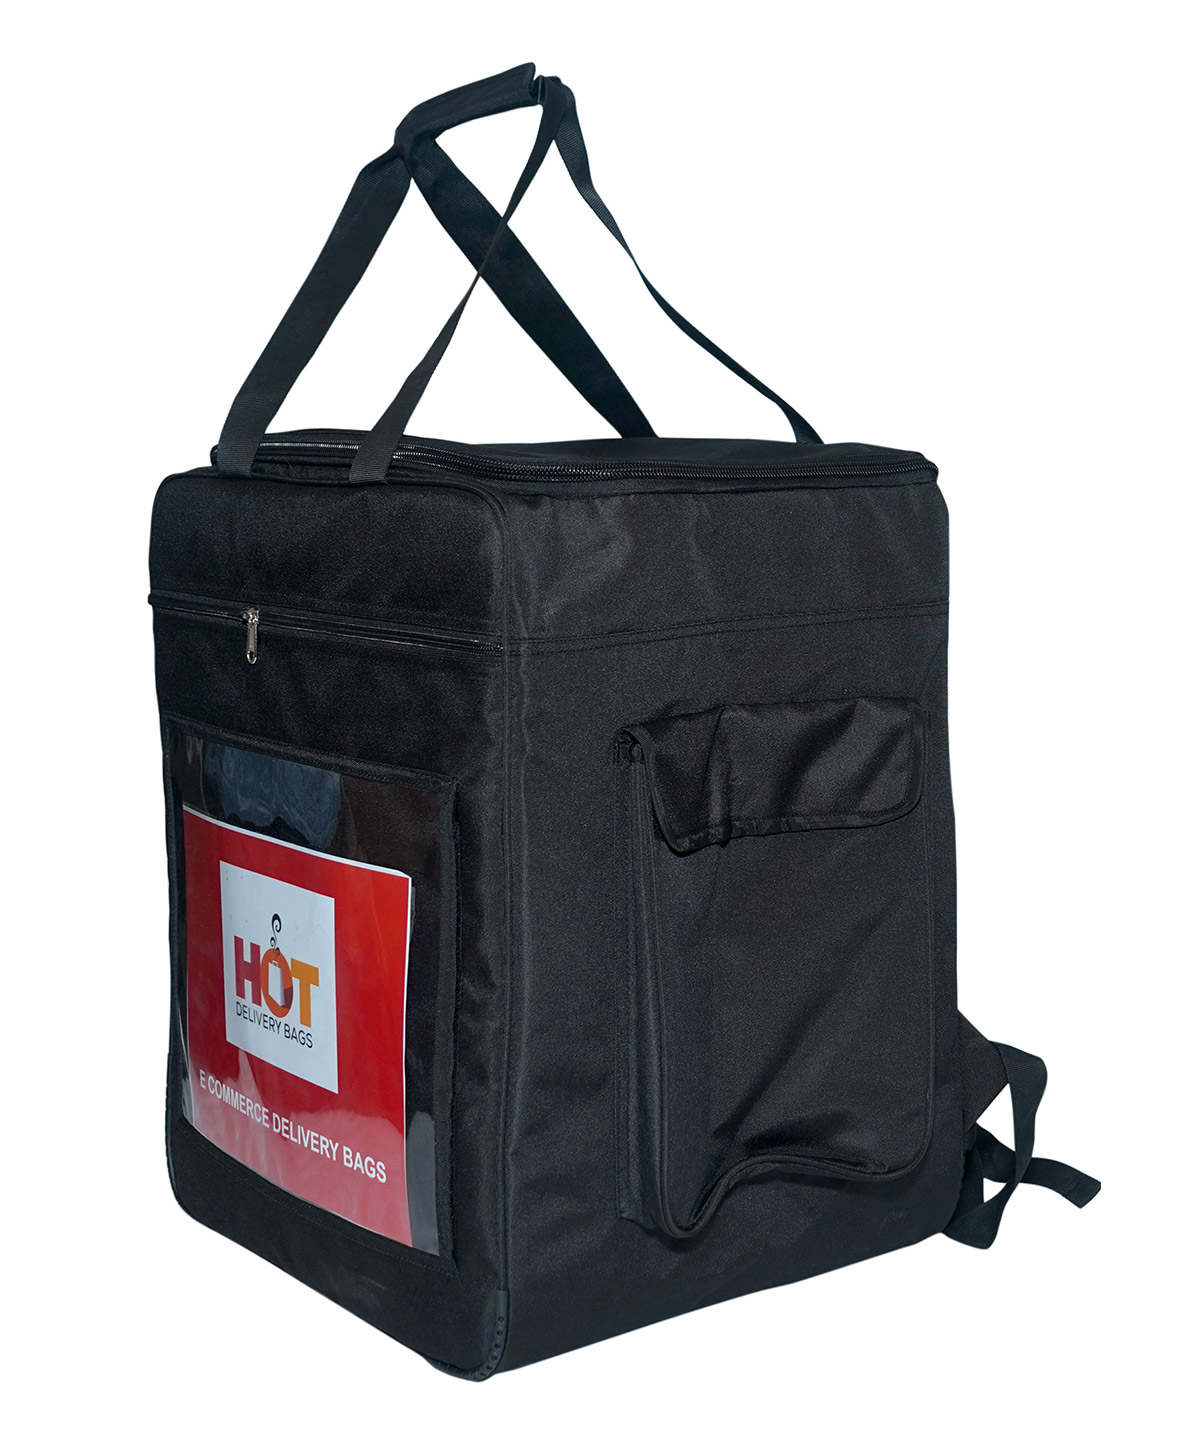 Amazon.com: Insulated Delivery Bag Carrier, 18